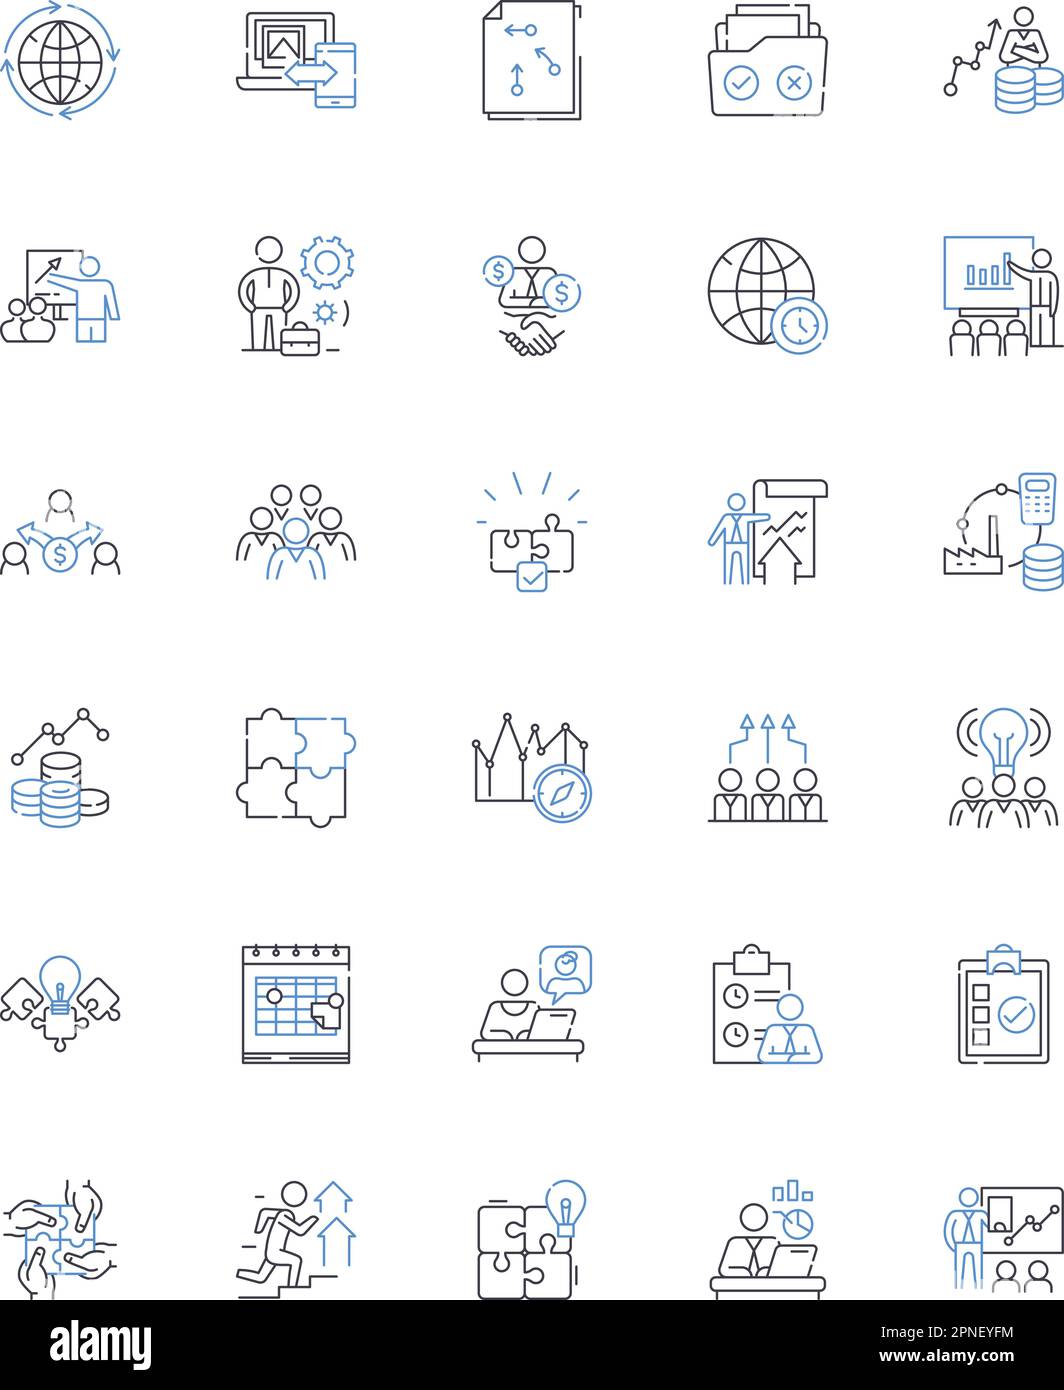 Marketing research line icons collection. Insights, Data, Analytics, Segmentation, Surveys, Questionnaires, Focus groups vector and linear Stock Vector